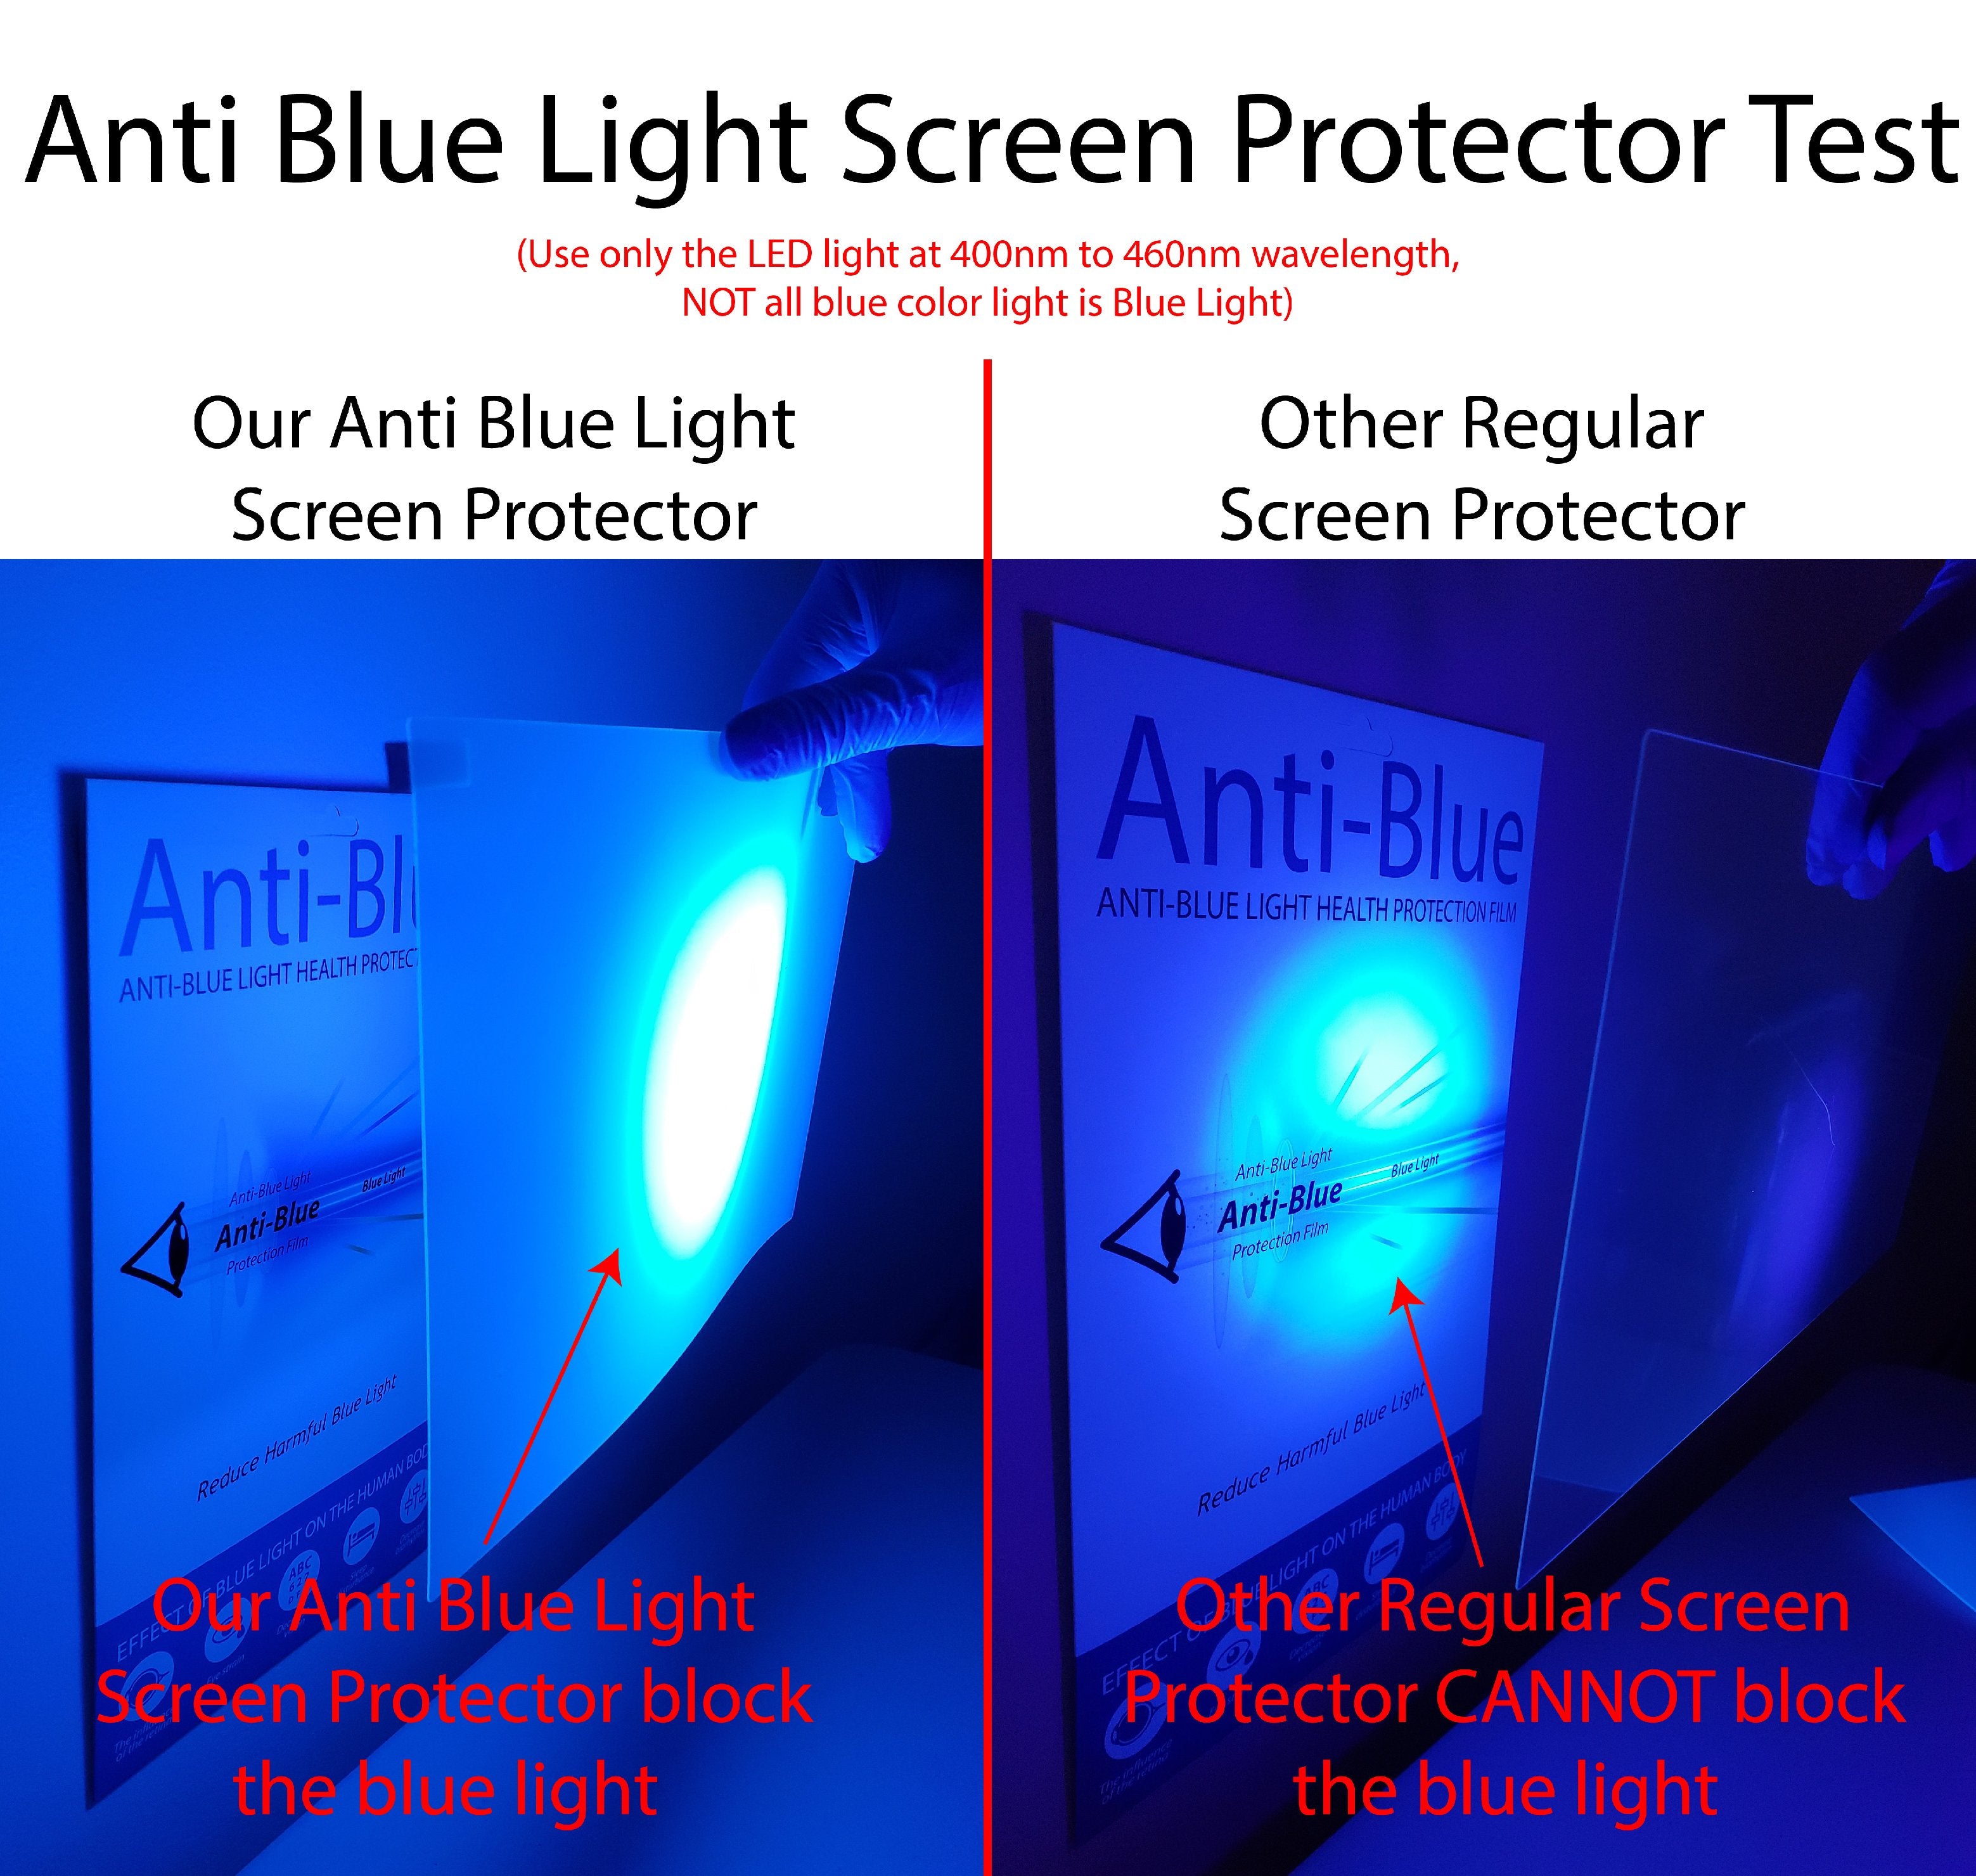 Anti Blue Light Screen Protector for TV. Filter Out Blue Light That Relieve Computer Eye Strain and Help You Sleep Better